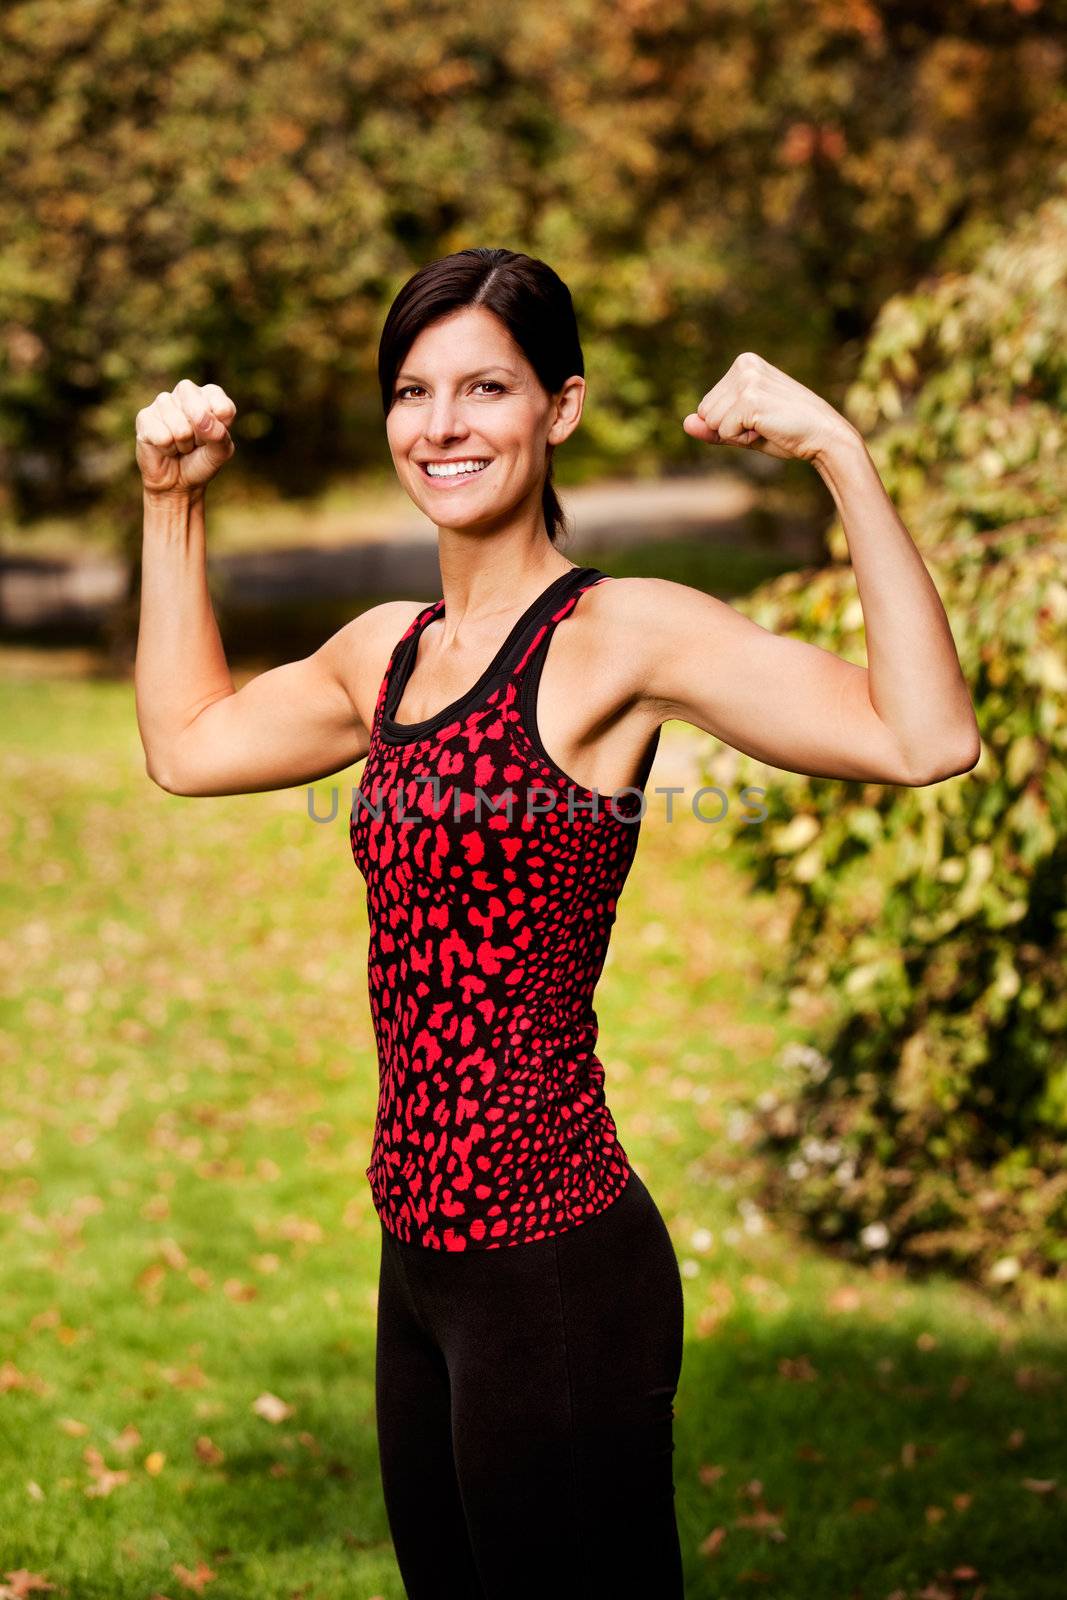 A portrait of a woman flexing her bicep muscles